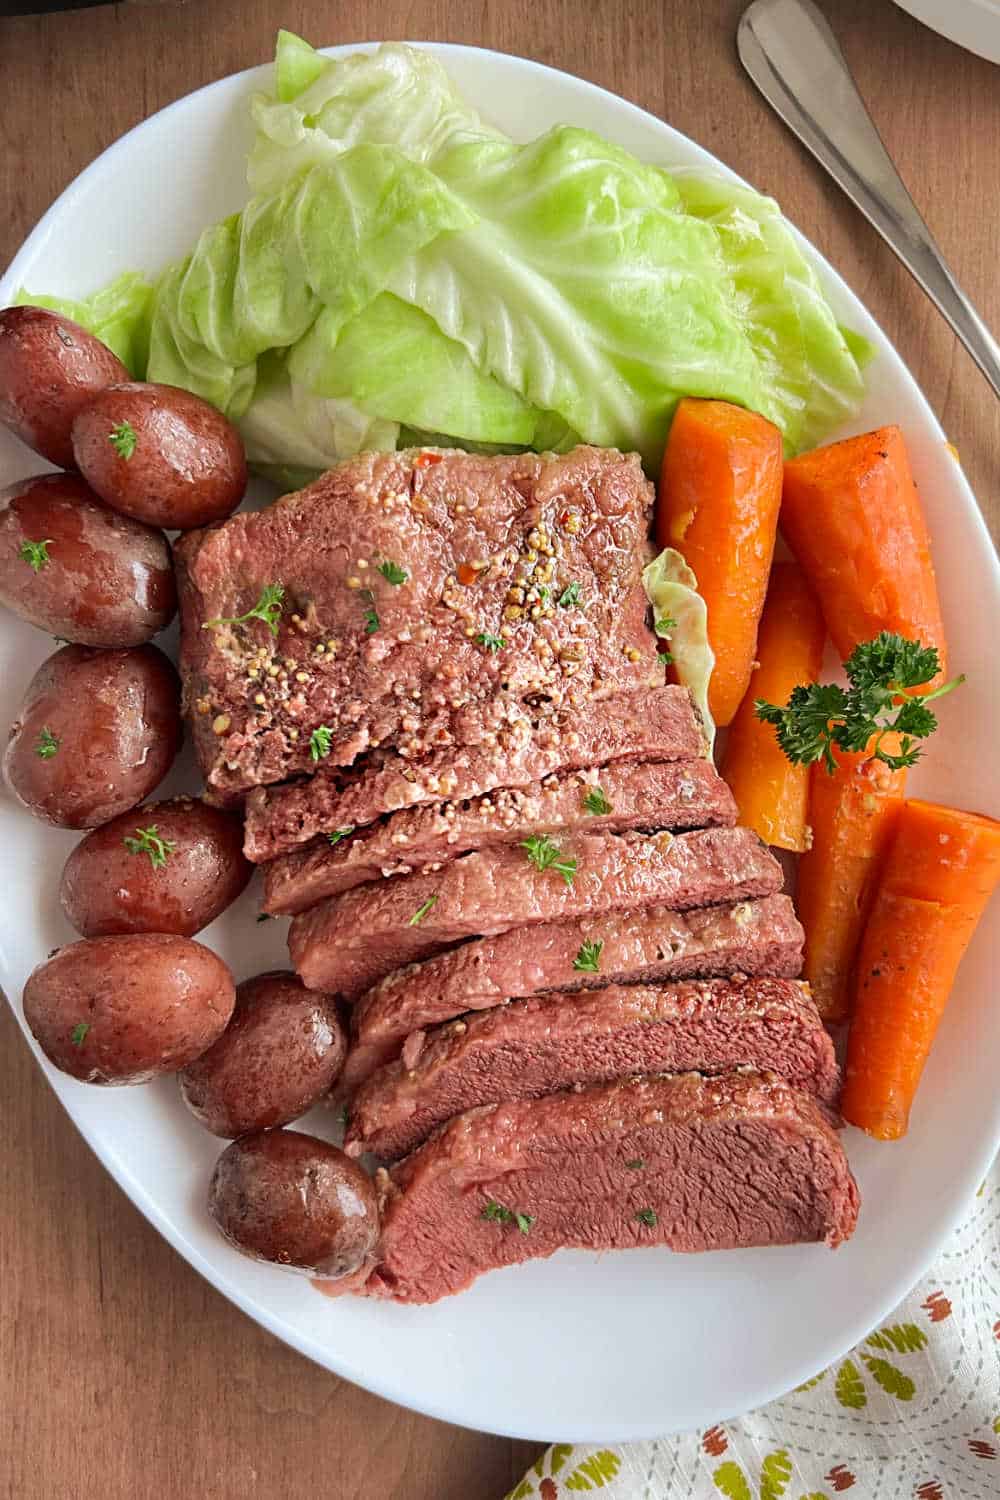 sliced corned beef brisket with baby red potatoes, green cabbage and carrots on platter.